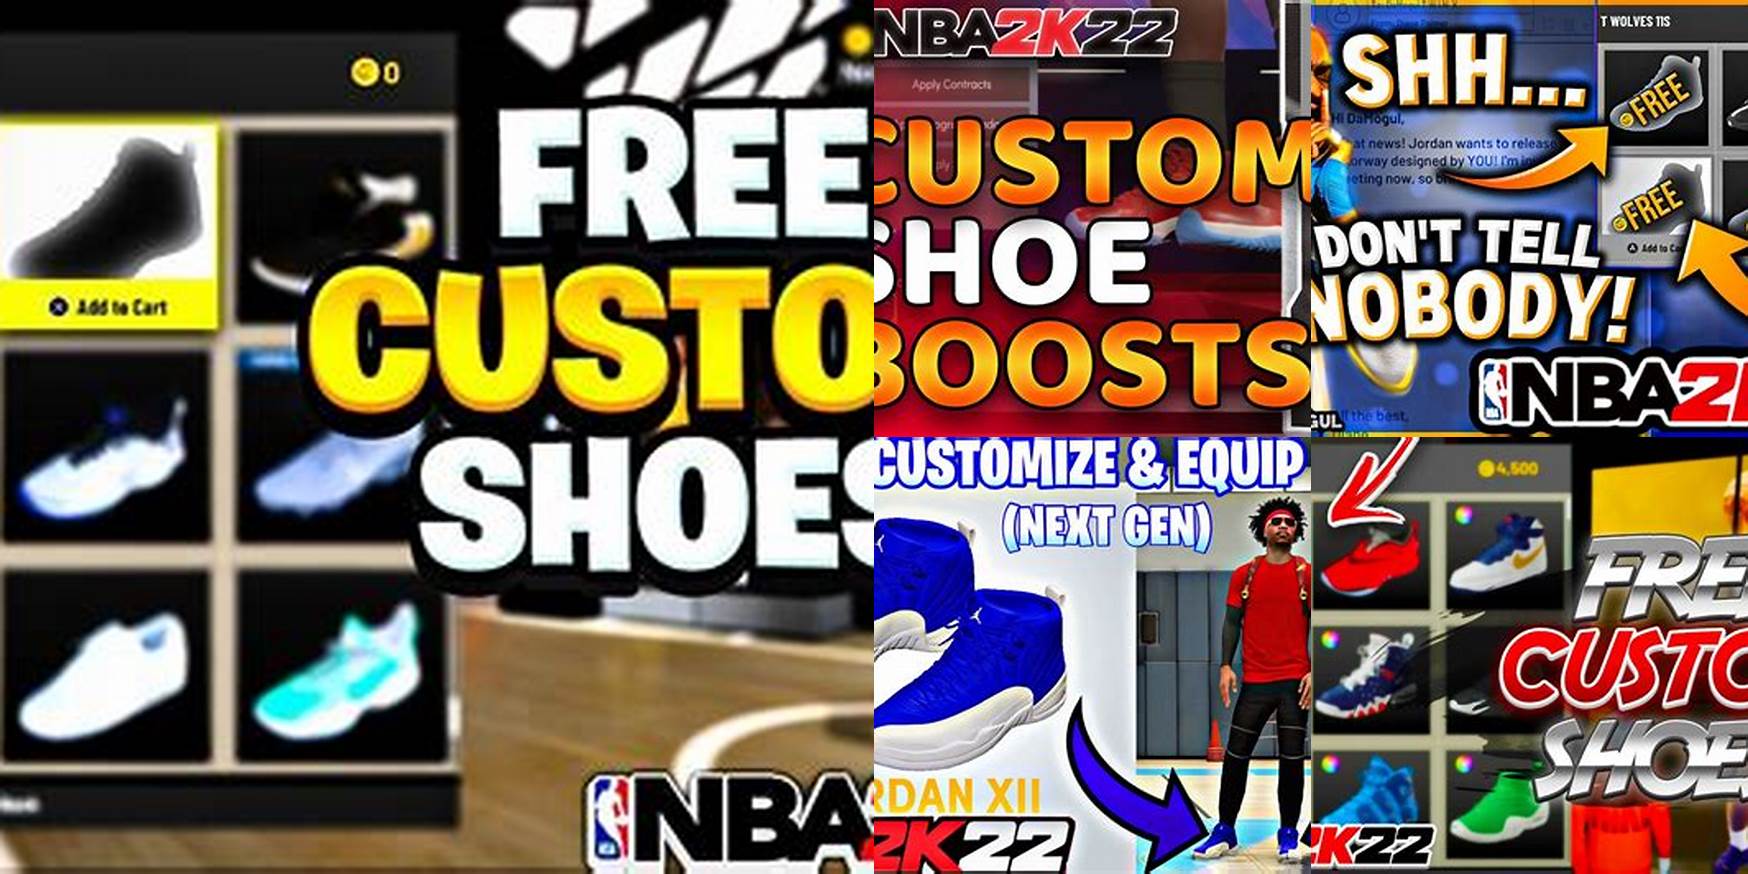 NEW* NBA 2K22 FREE UNLIMITED SHOE GLITCH! HOW TO GET FREE SHOES IN